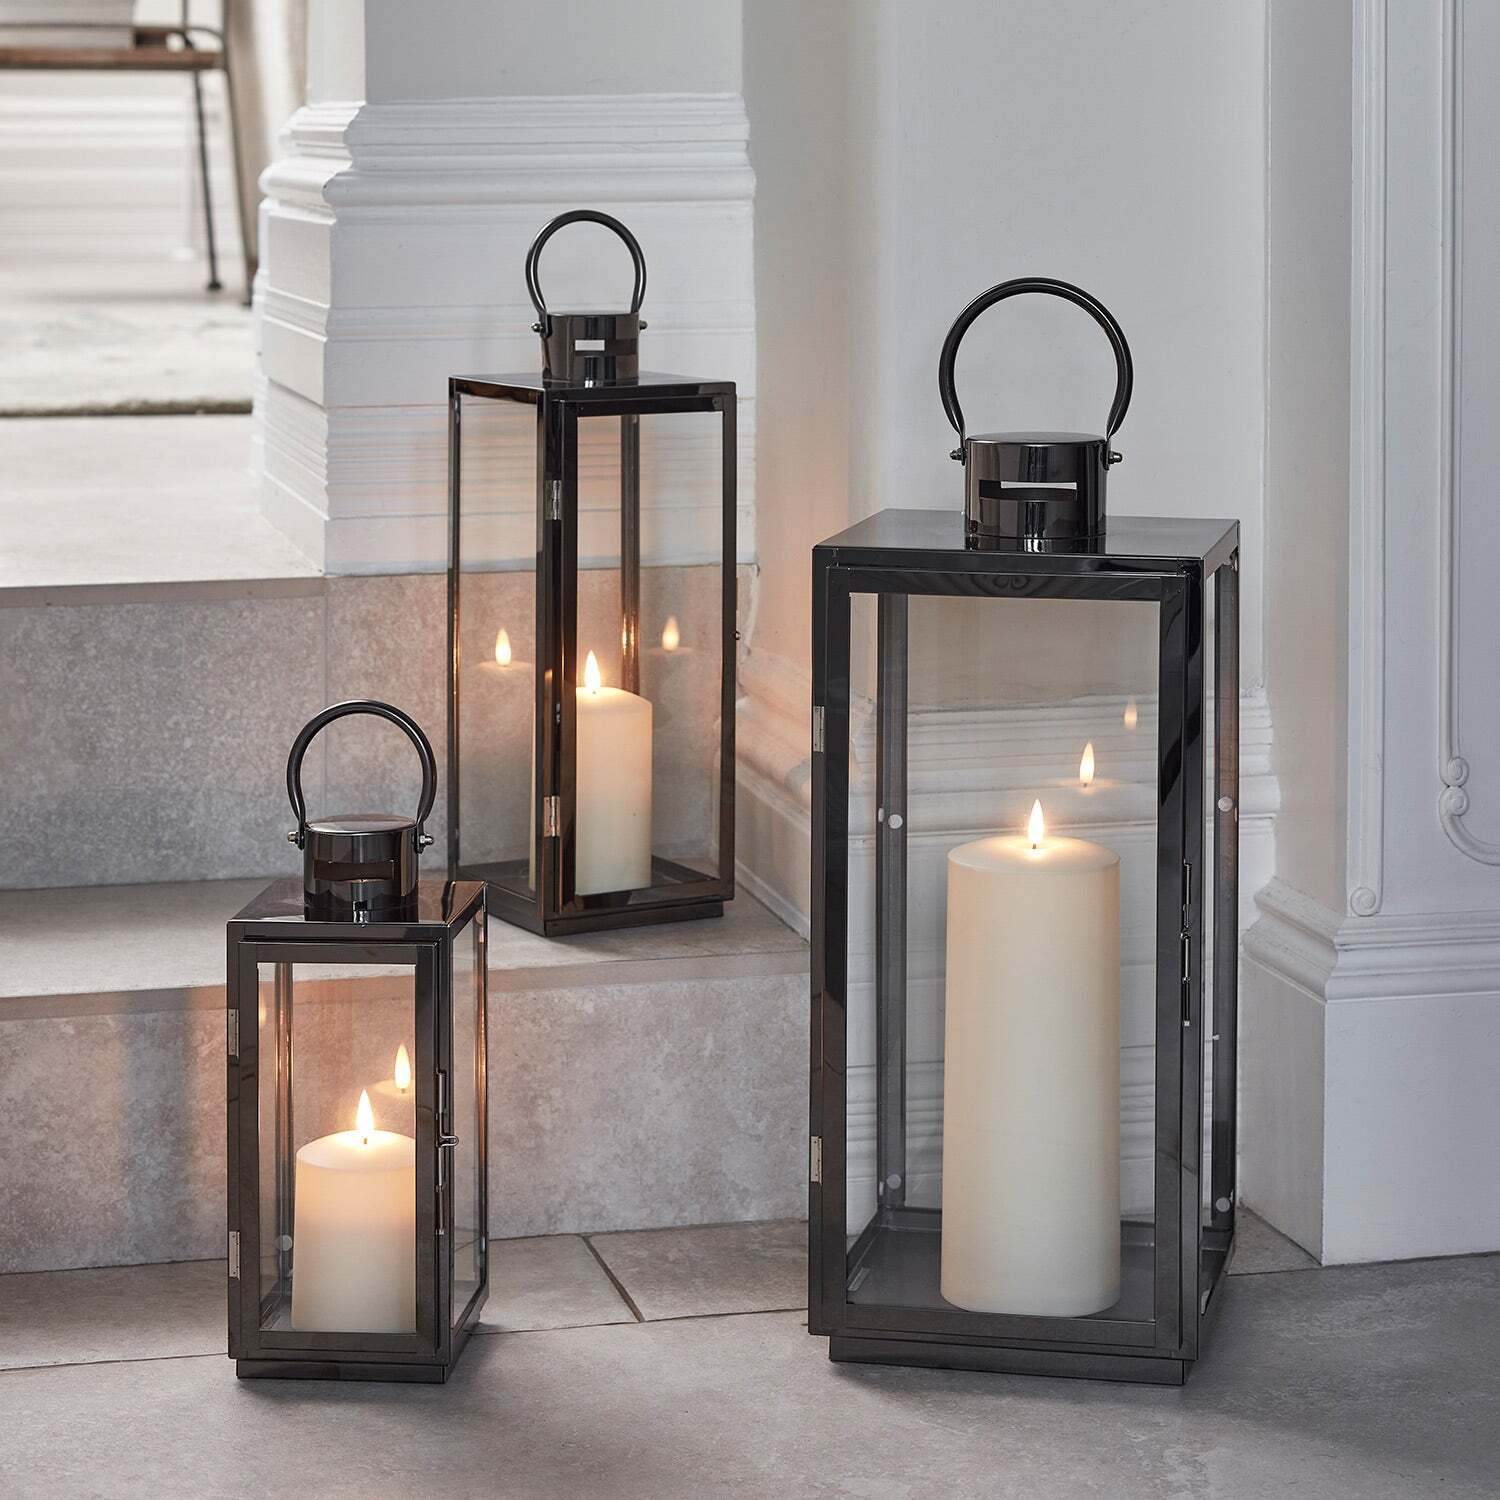 Stainless Steel Candle Lantern Trio with TruGlow® Candles - image 1